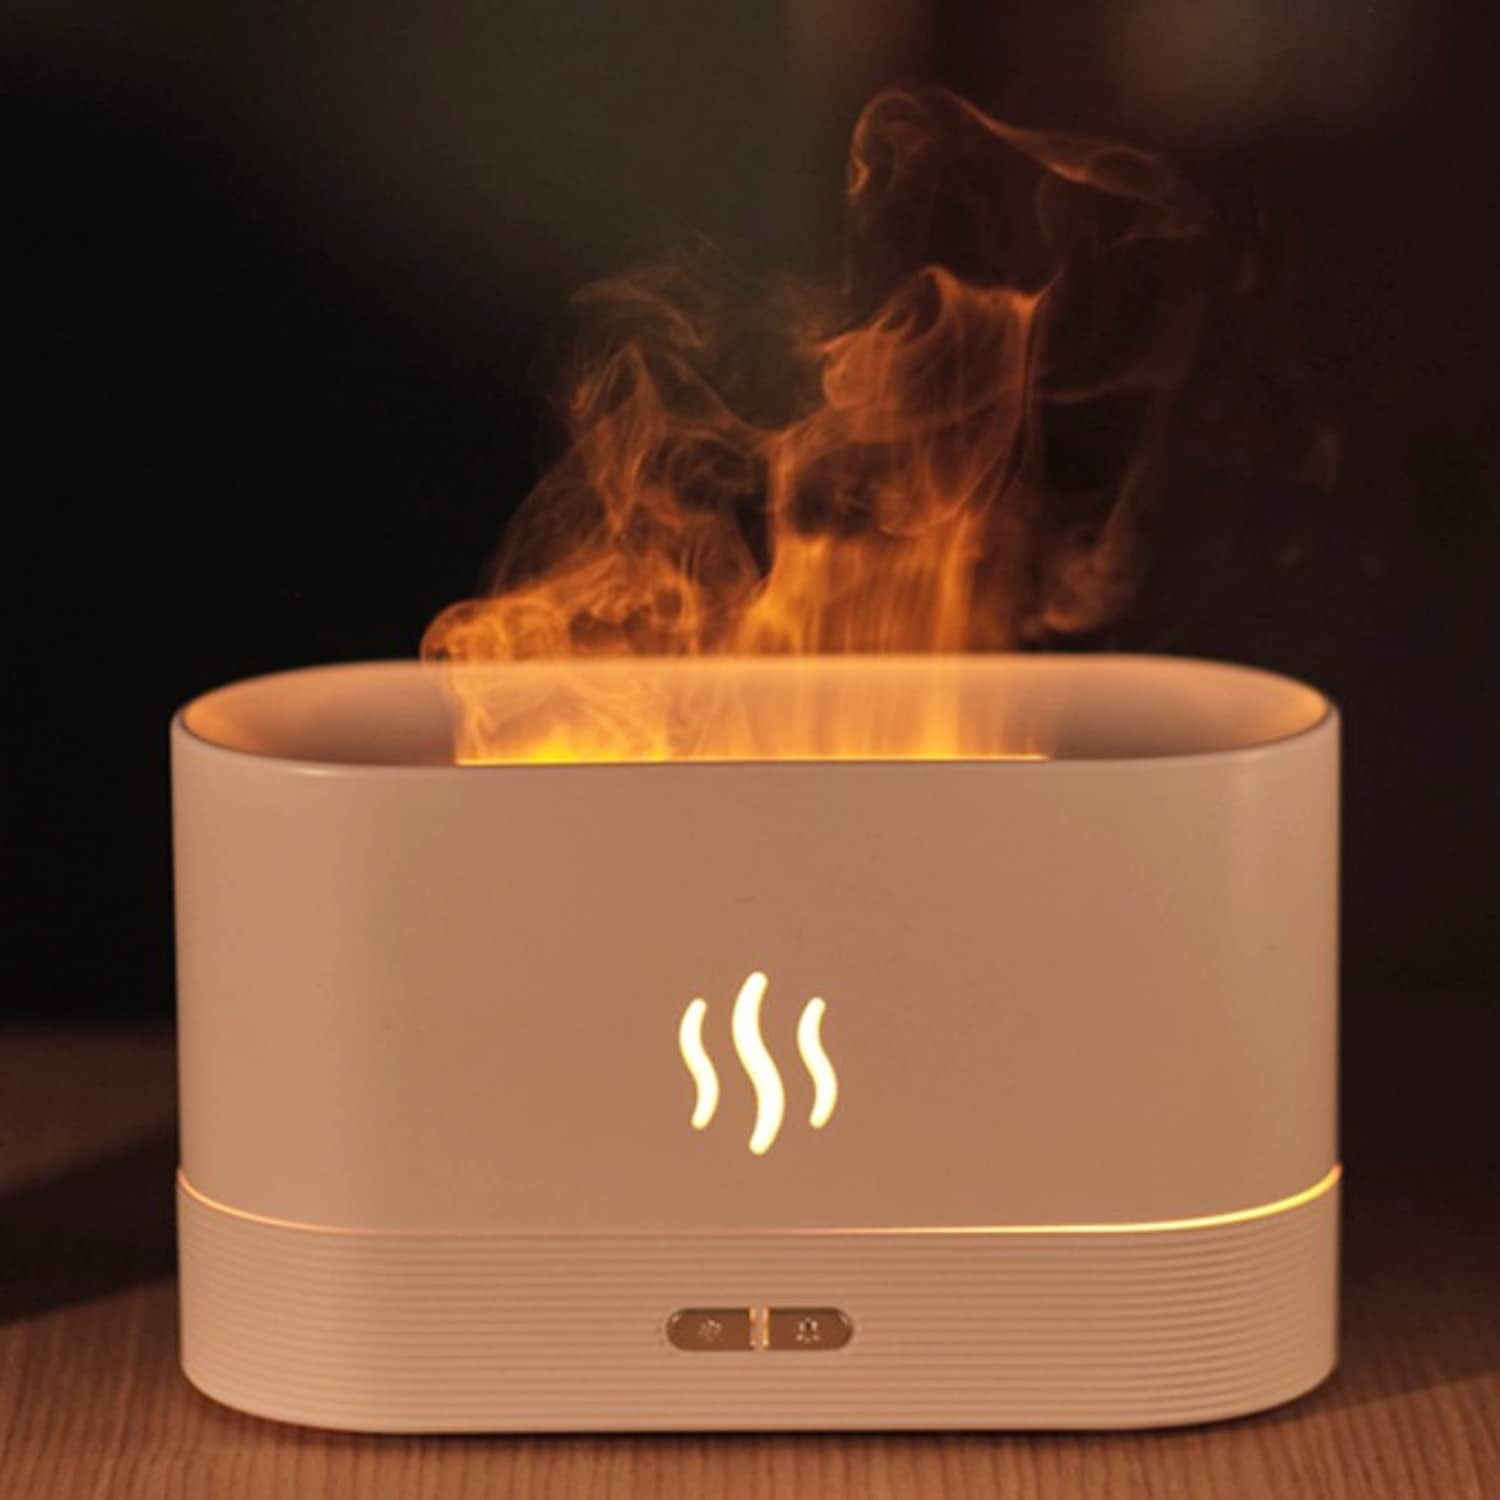 Portable Flame Essential Oil Diffuser USB Car Diffuser, Flameless Bright  Candles Air Aroma Diffuser, Humidifier with Auto-Off Protection,  Aromatherapy